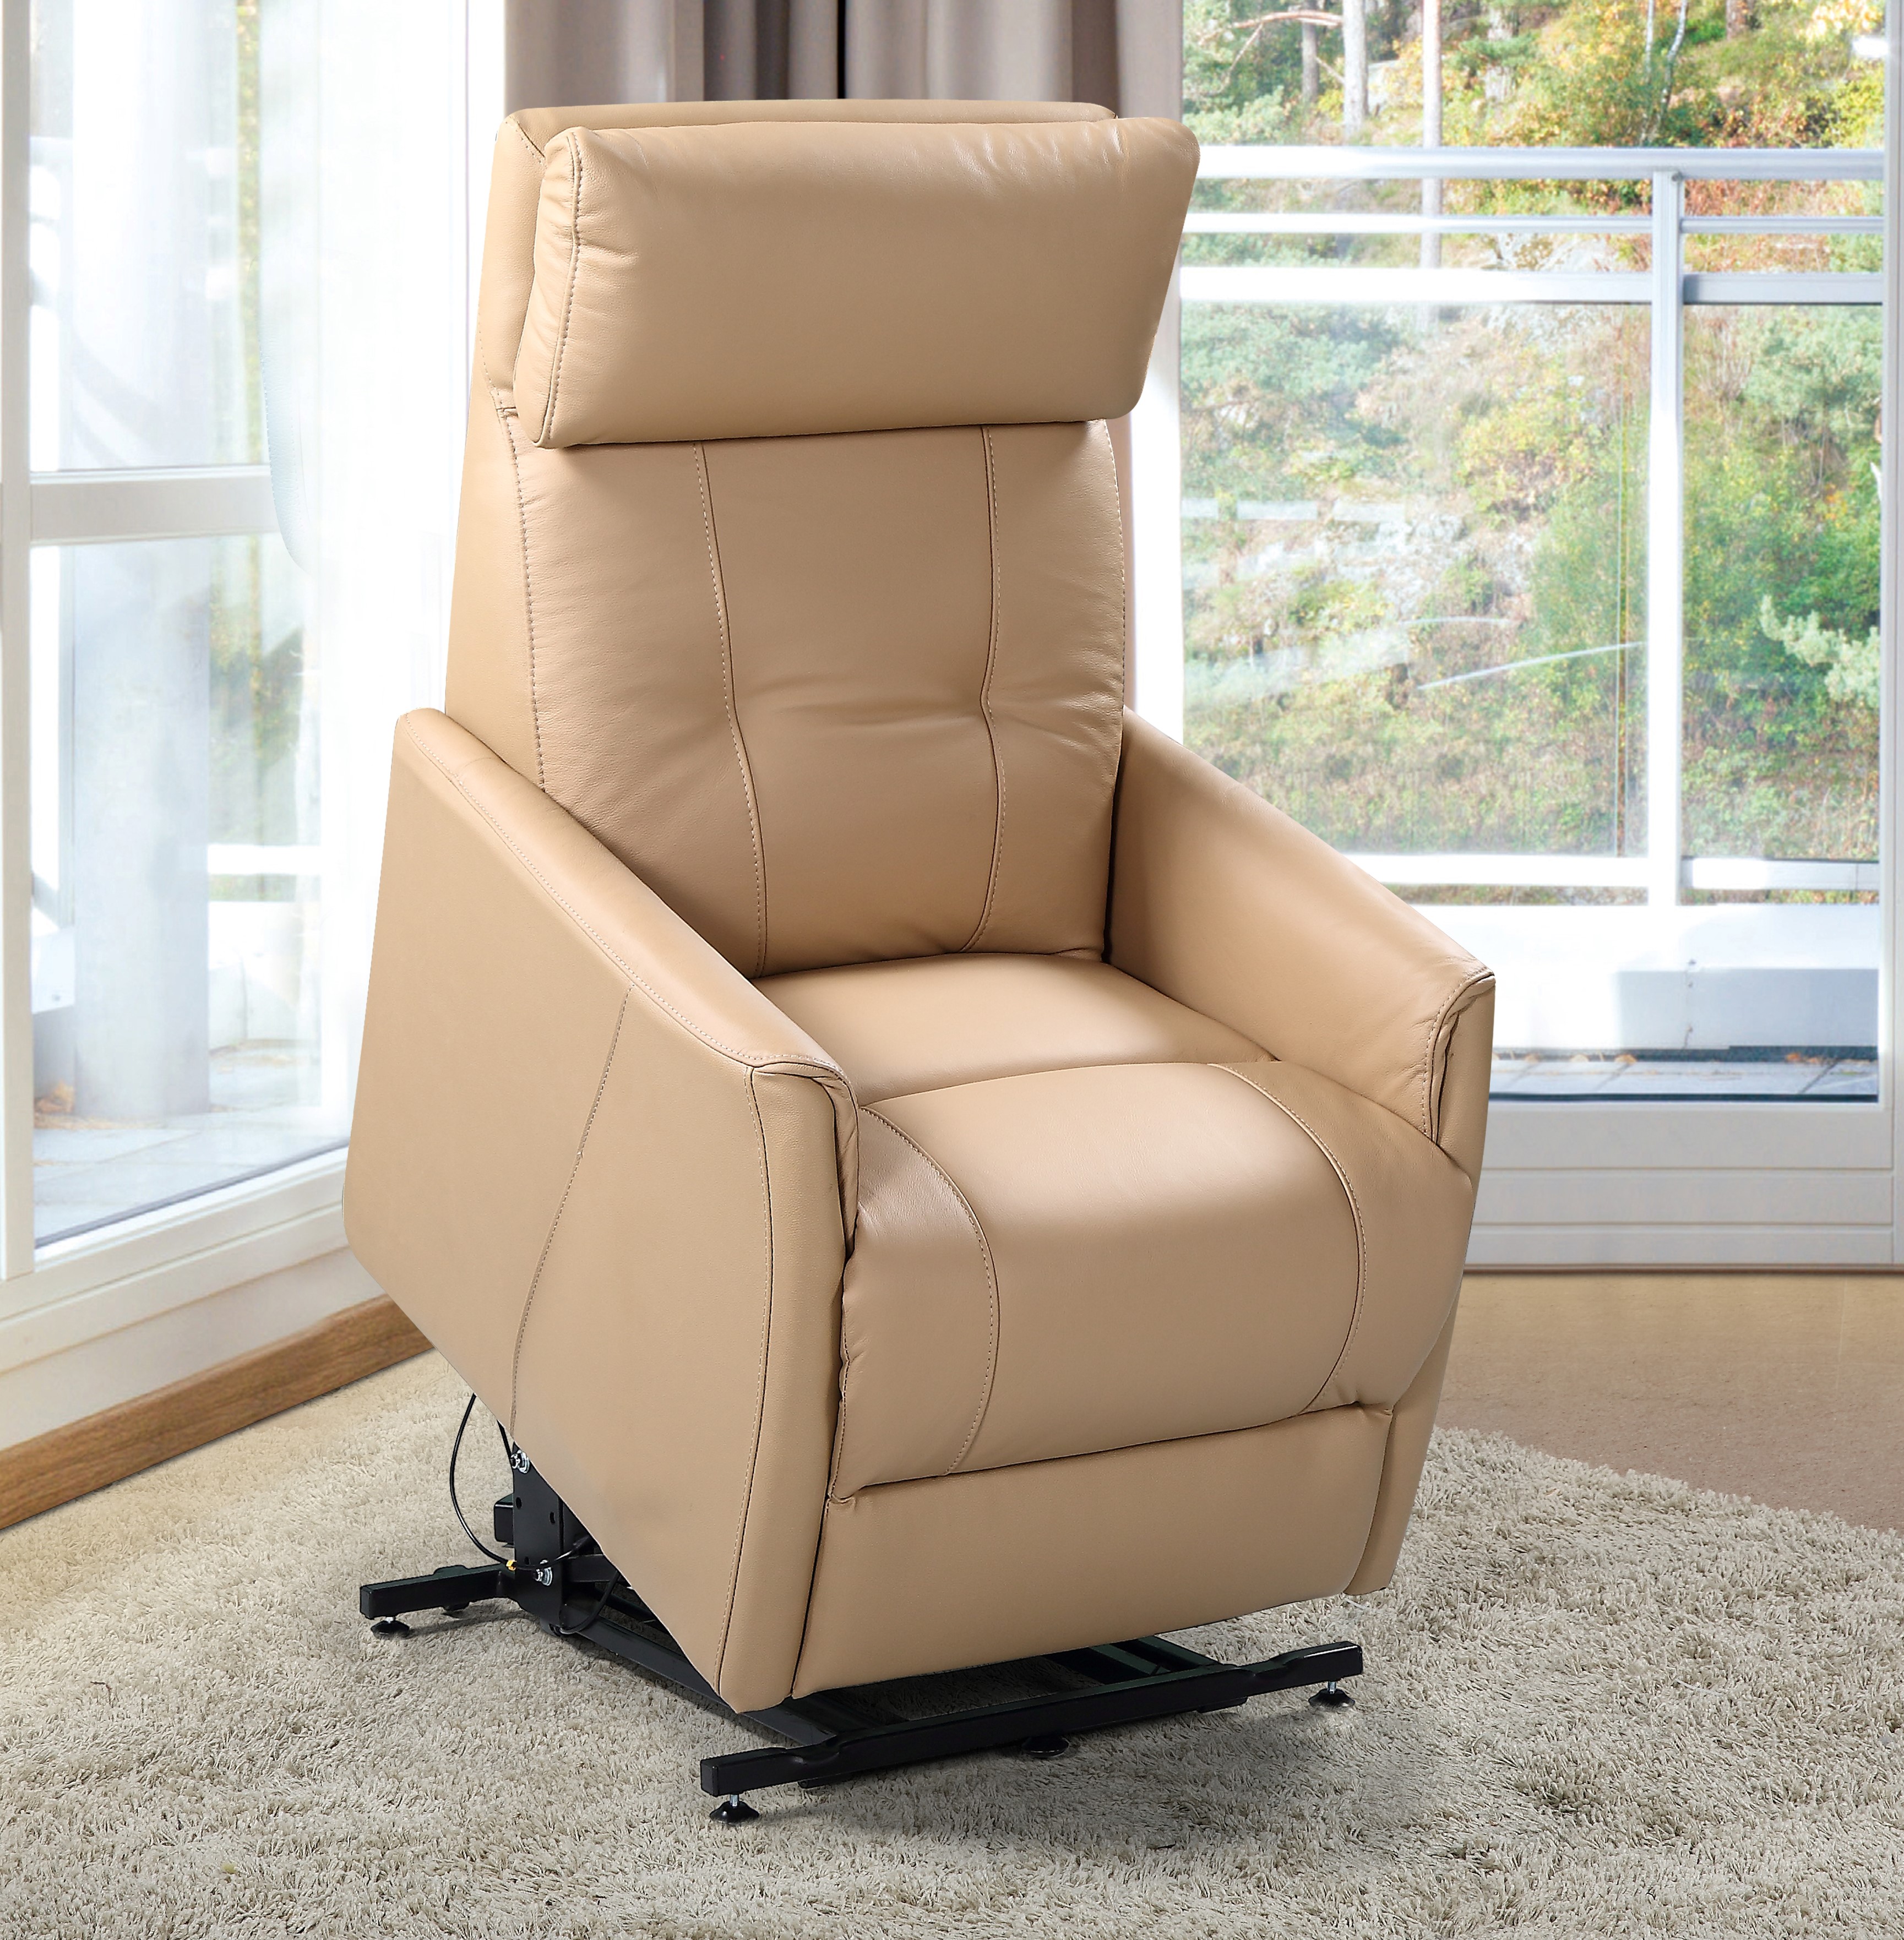 Lift chair, zero gravity with two motor LN6384